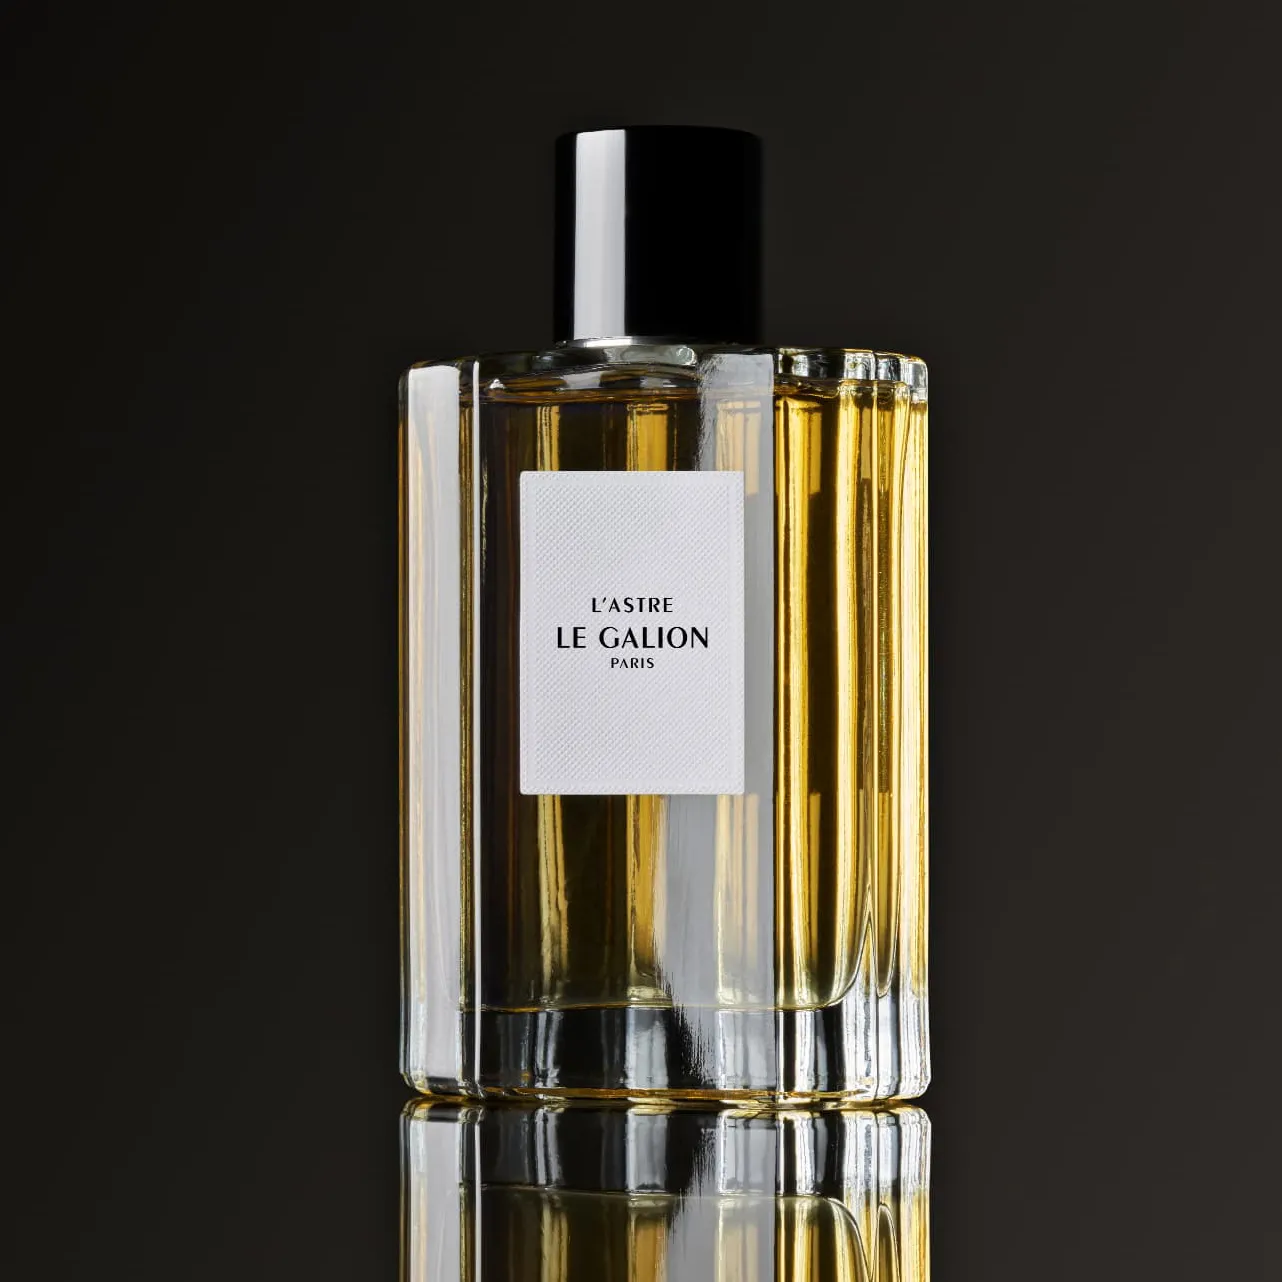 L'Astre by Le Galion (Ava Gardner's bespoke scent) | Perfume Posse